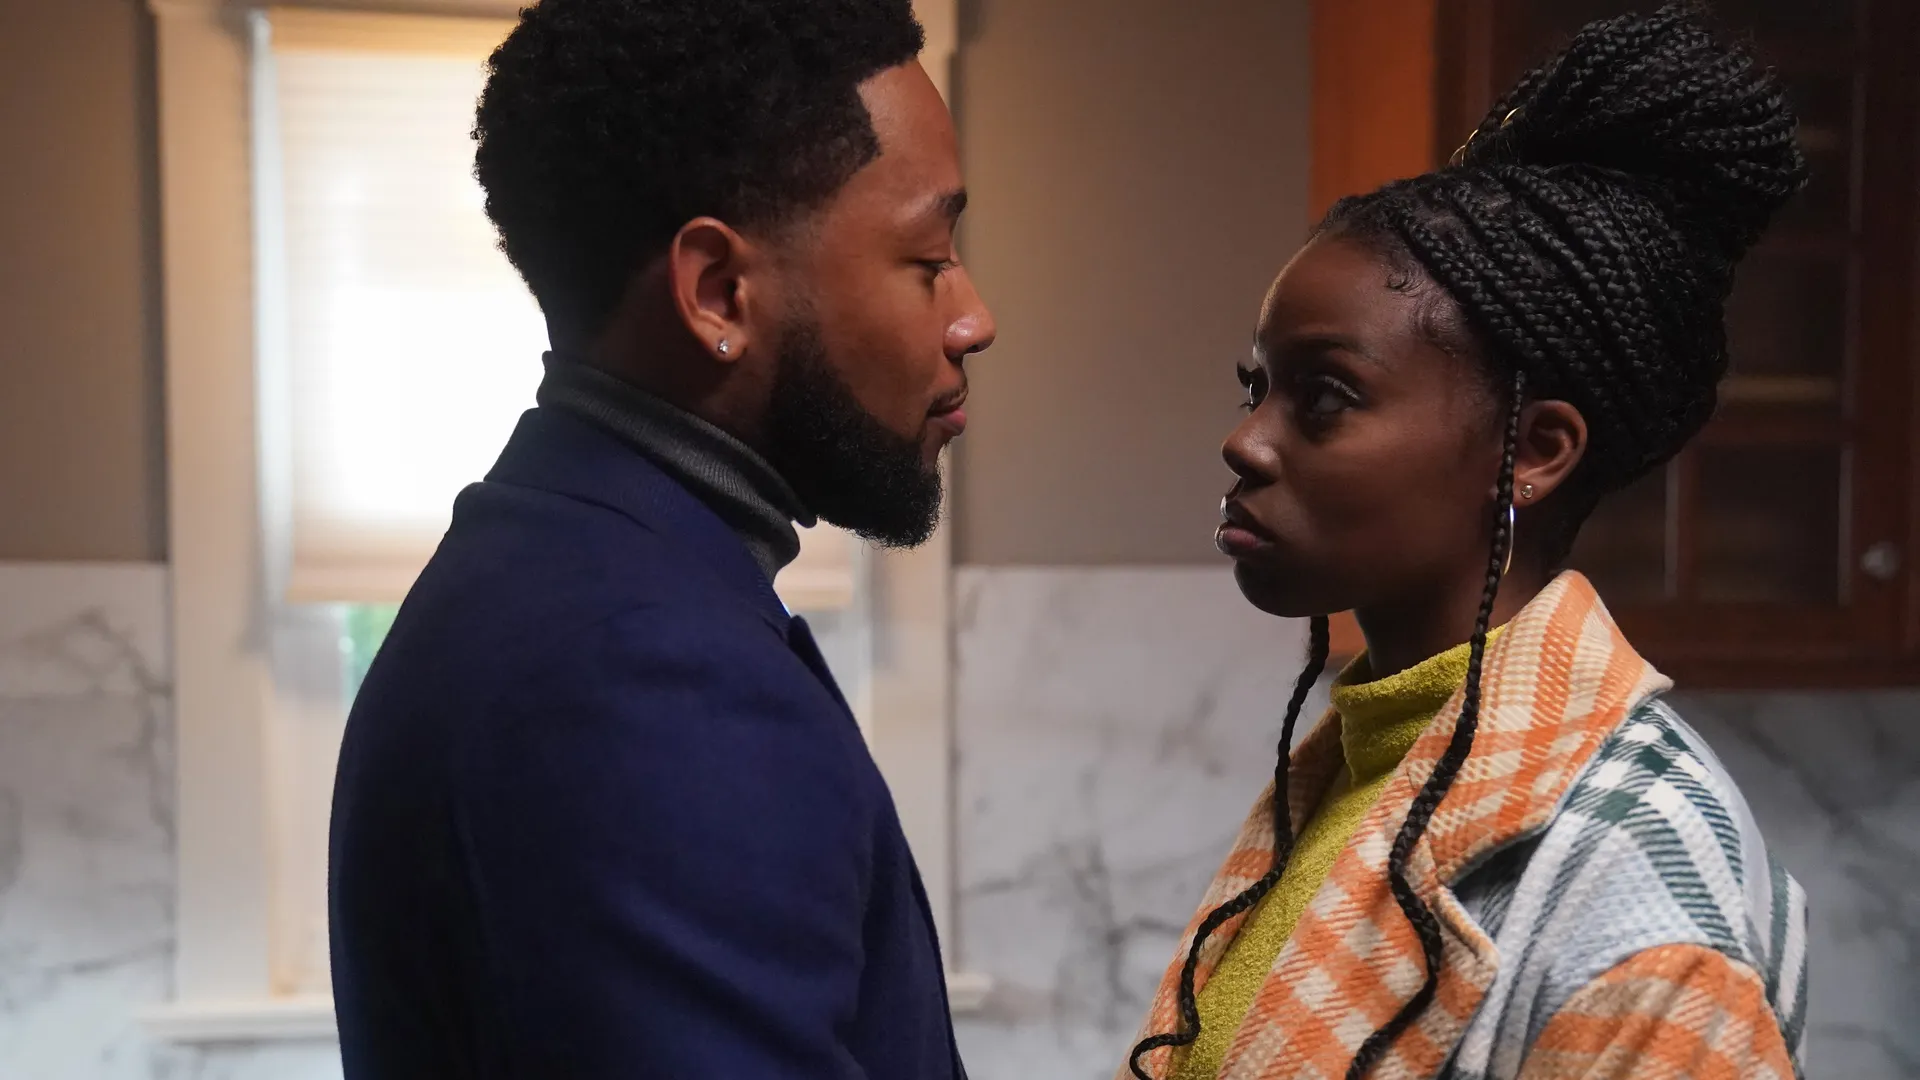 Two characters in "The Chi" are having a conversation in the kitchen.